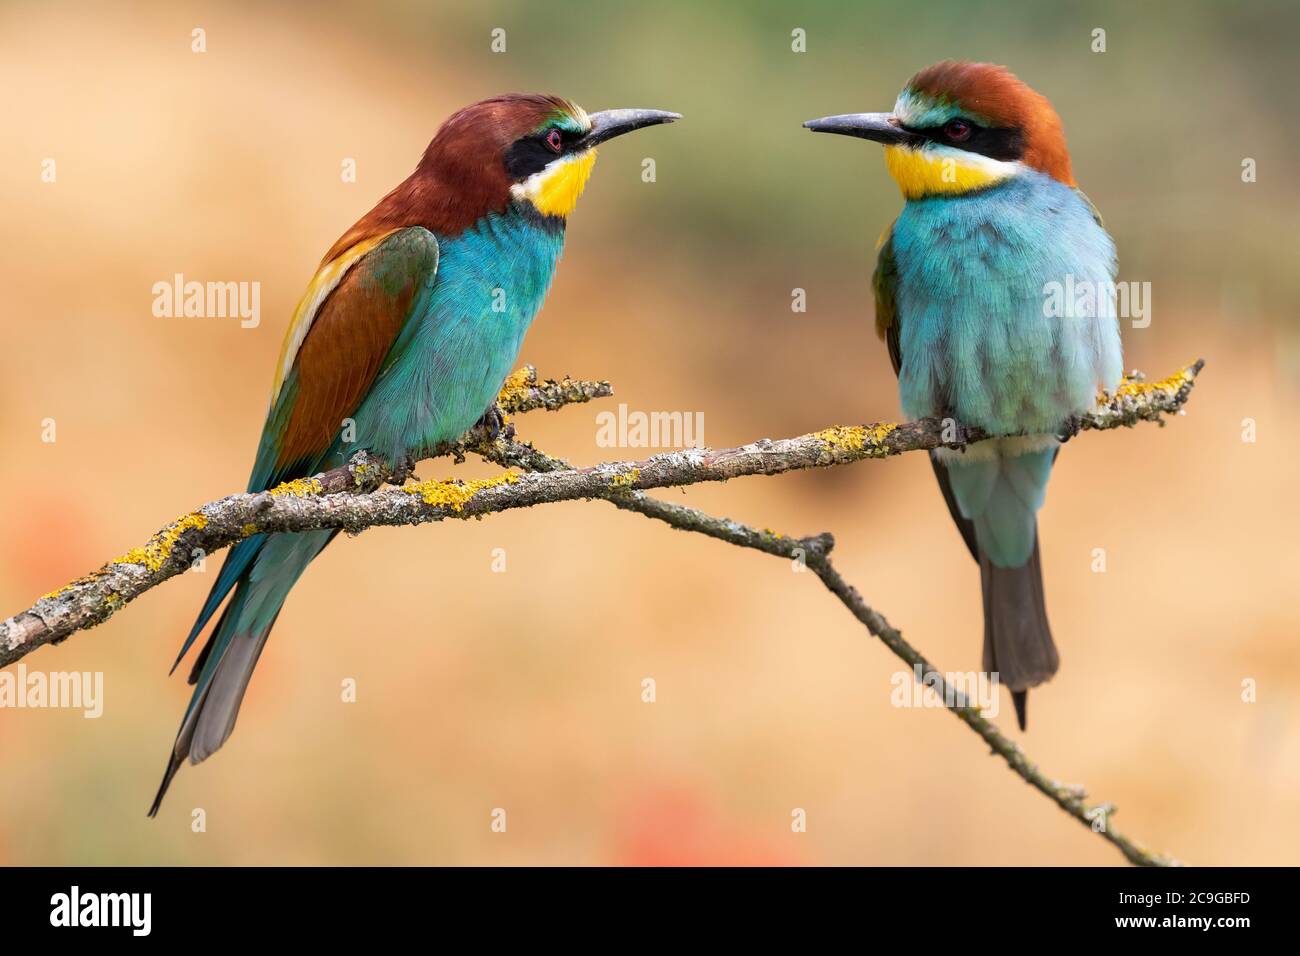 European Bee-eater, Merops apiaster, two individuals perched on a branch against an unfocused background. Spain Stock Photo